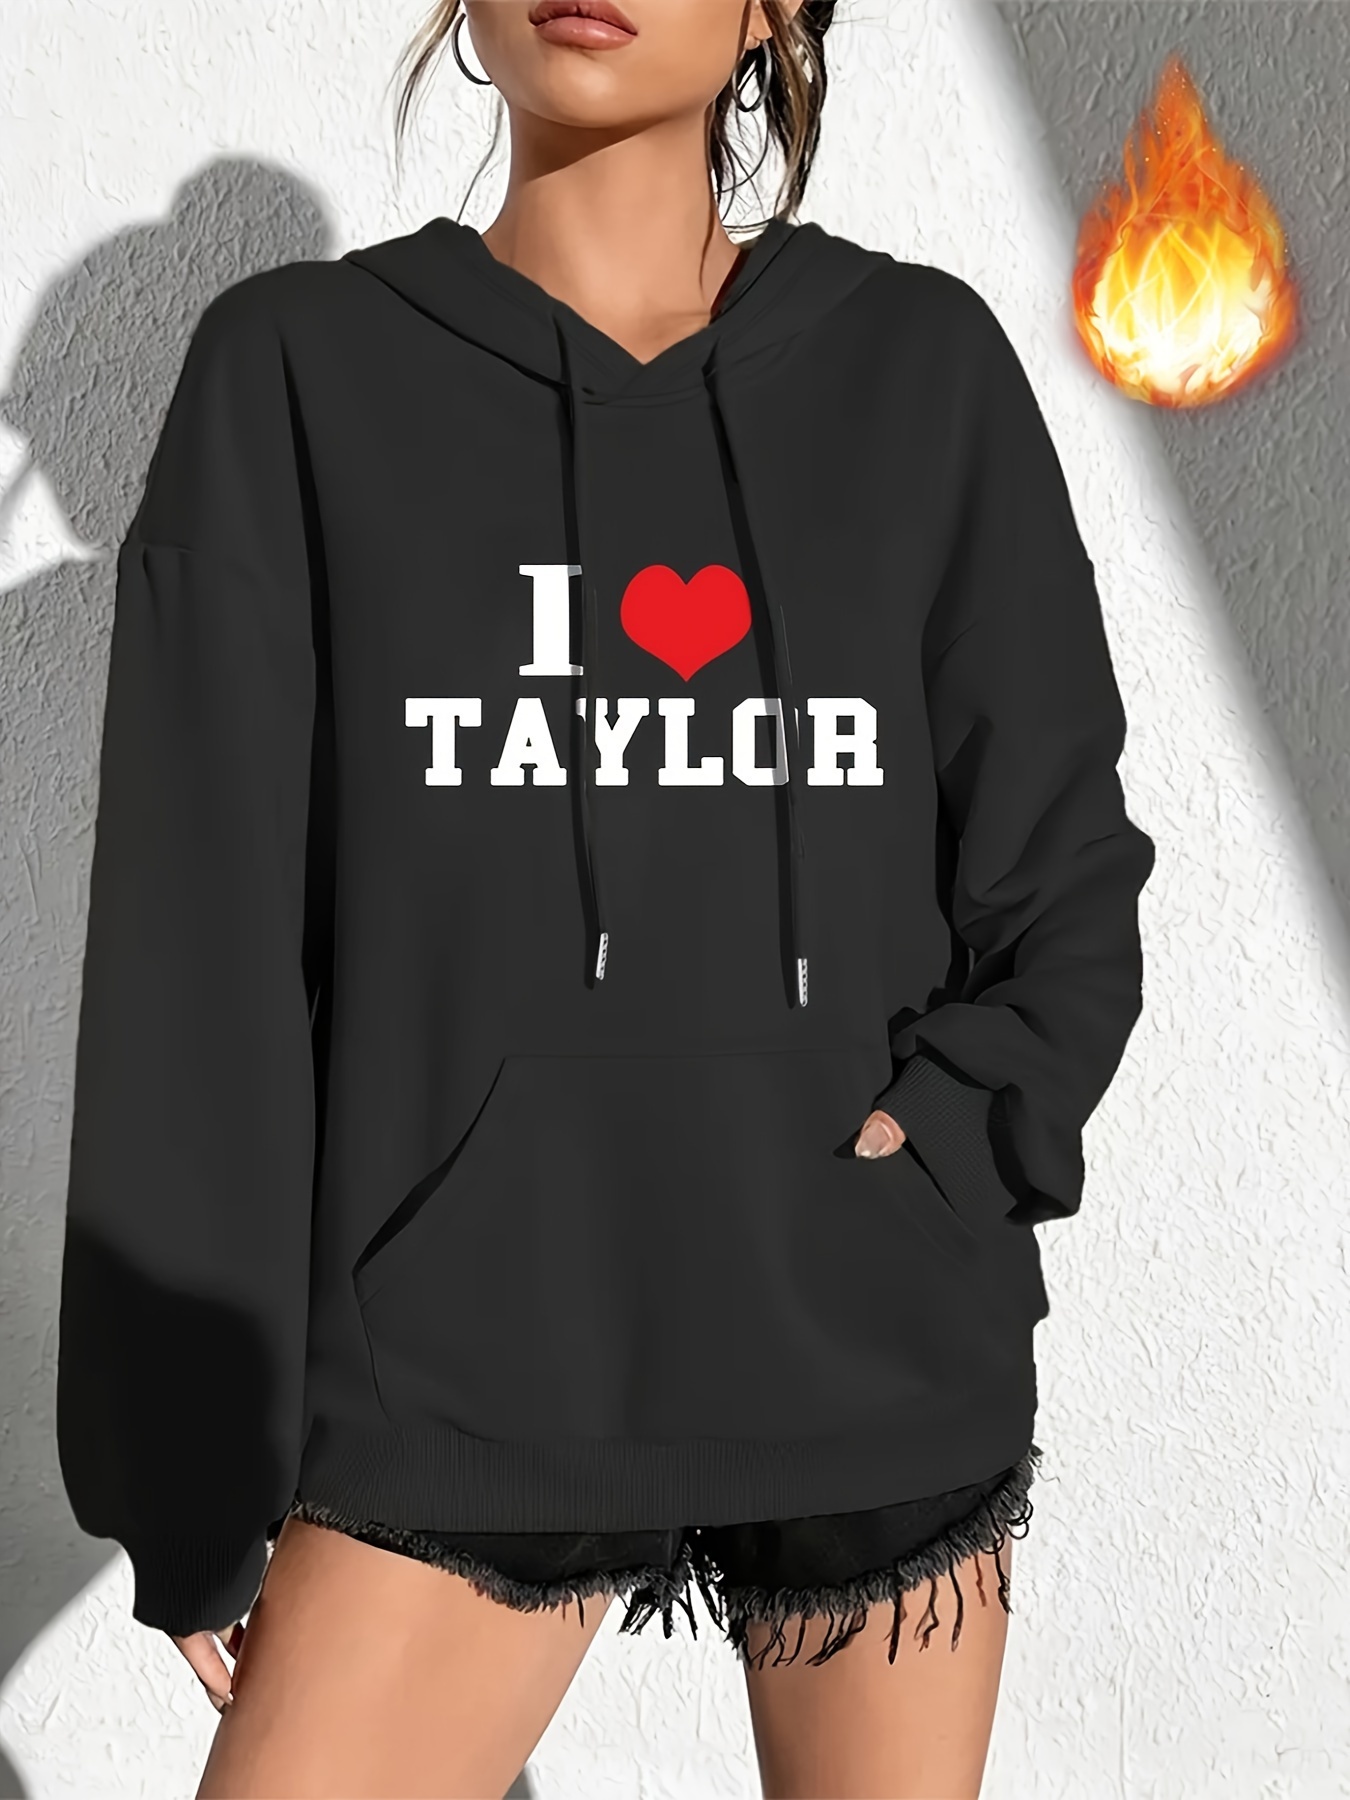 I Love TS Star Taylor Swift Stanley Tumbler Cup Charm Accessories